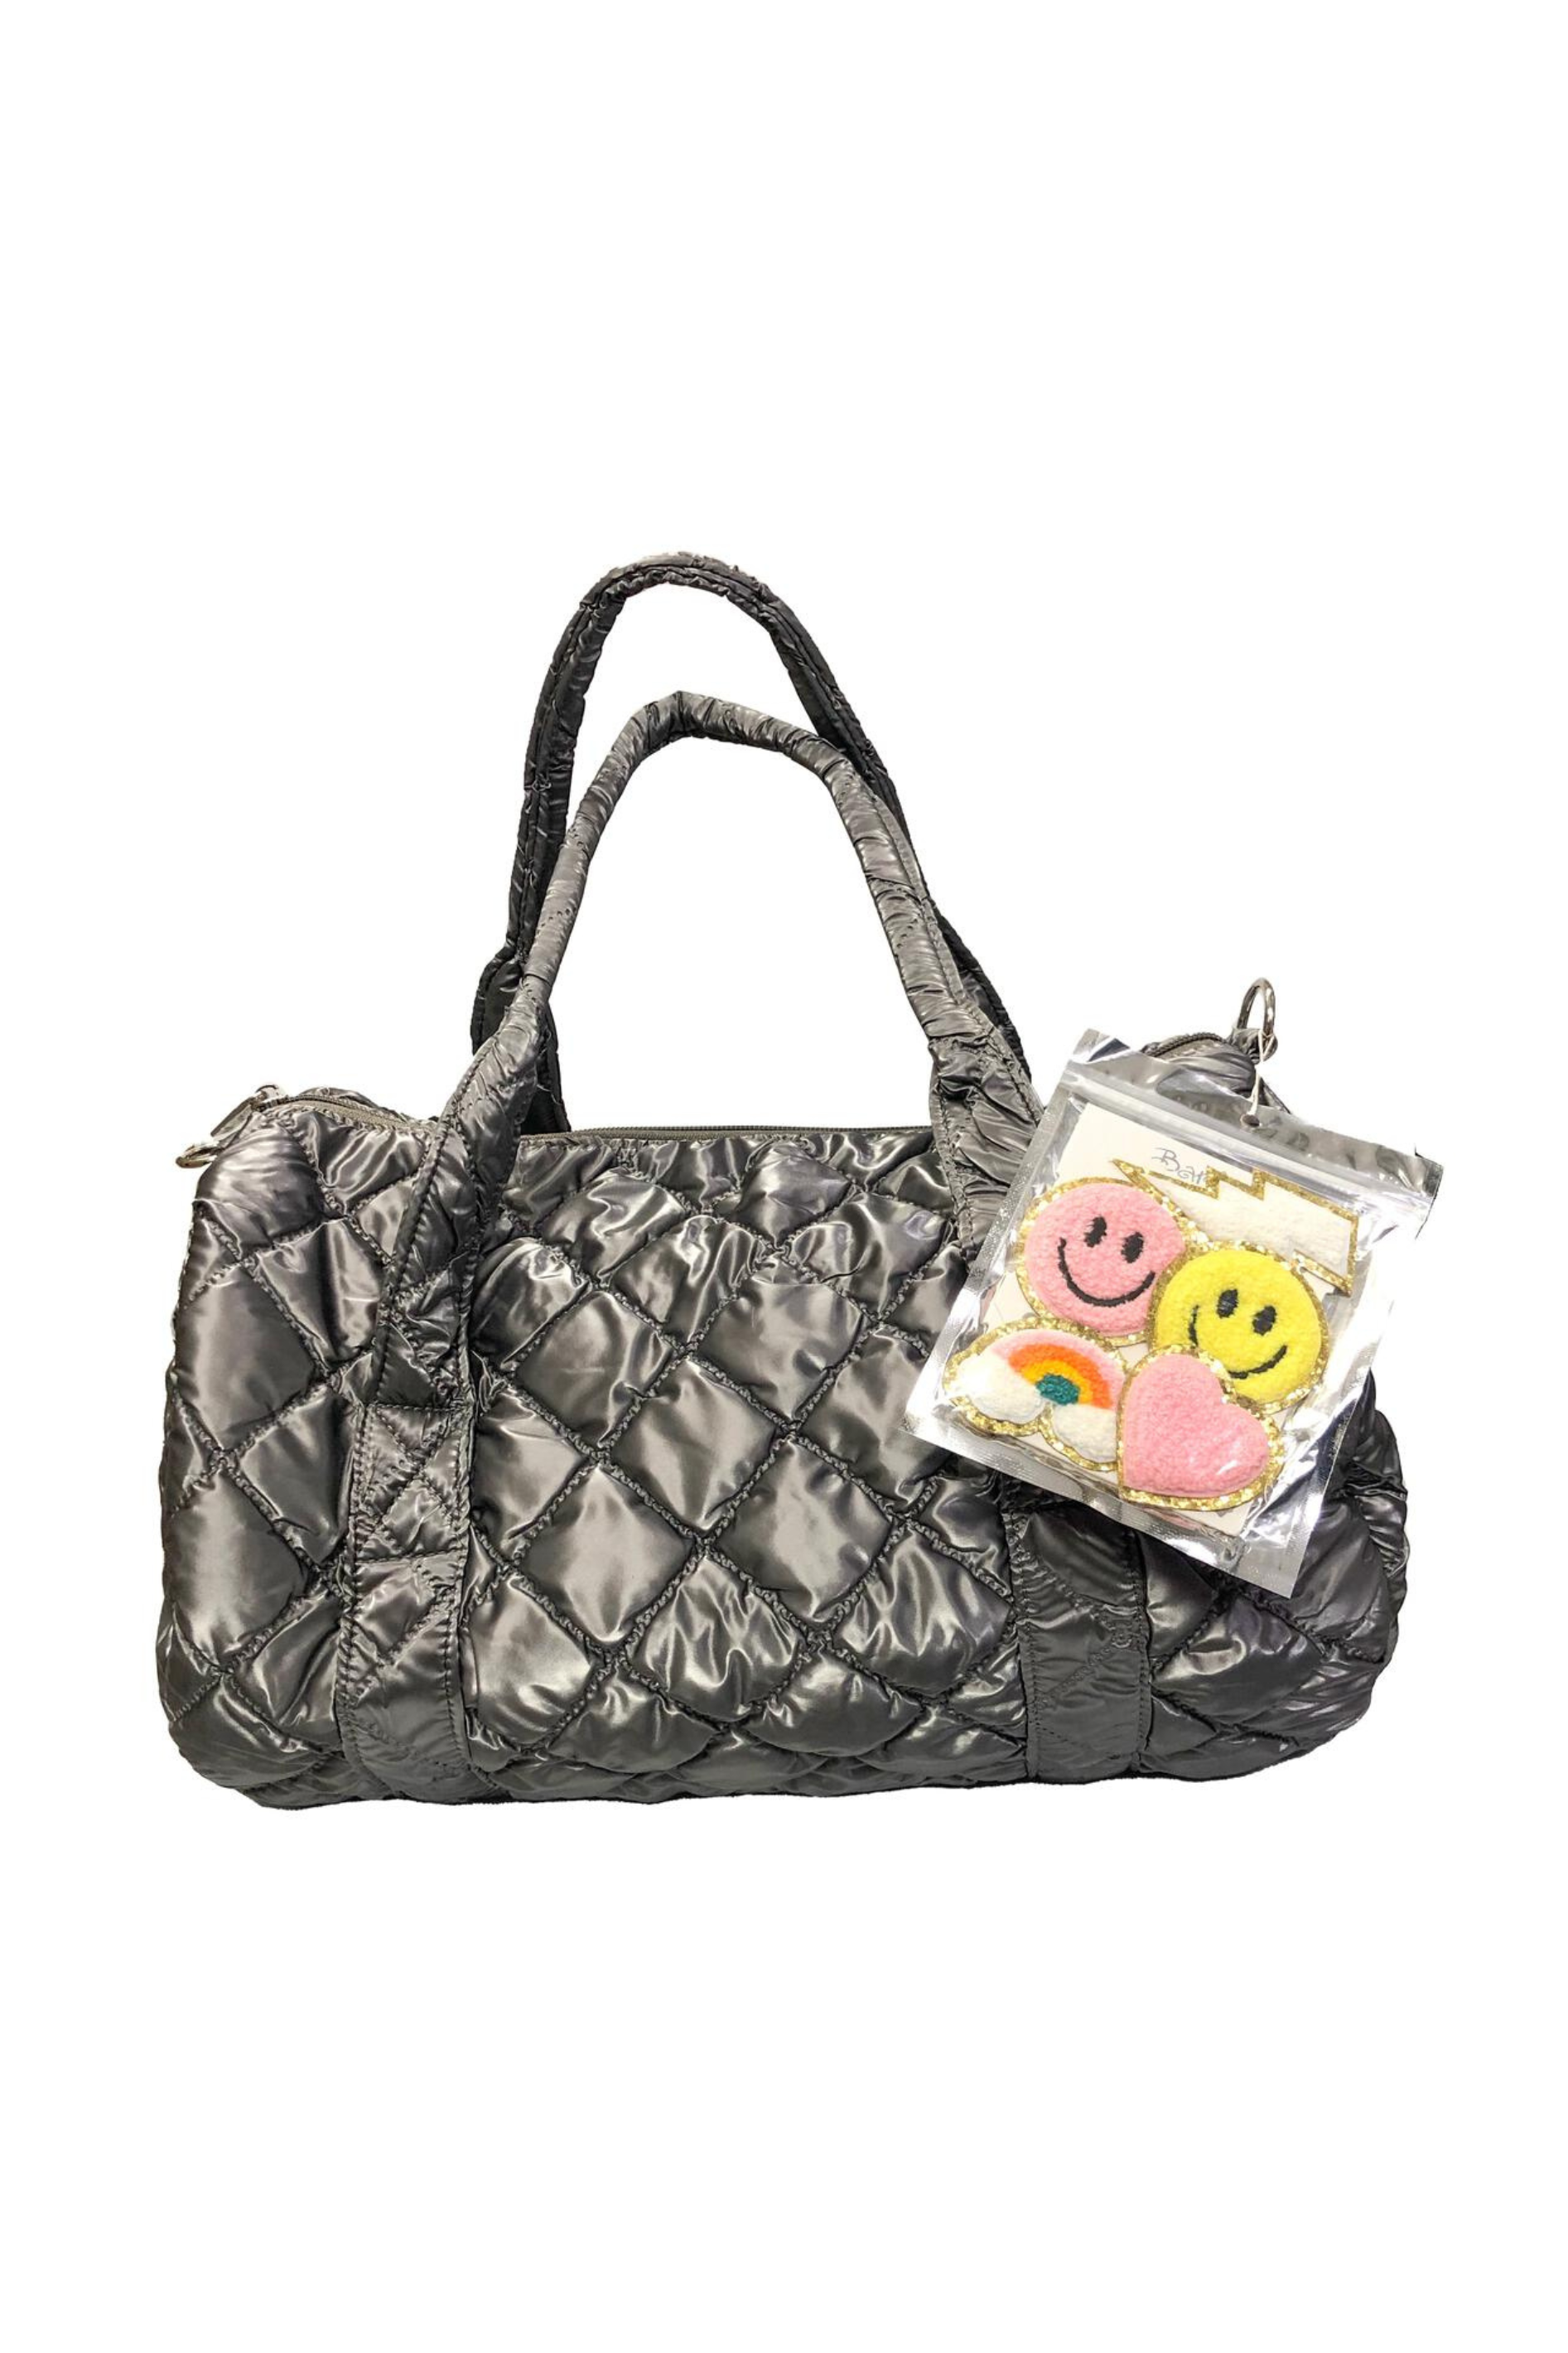 Bari Lynn Quilted Hearts Duffle Bag - PHOL-D - ShirtStop - Your home base  for kids basics!